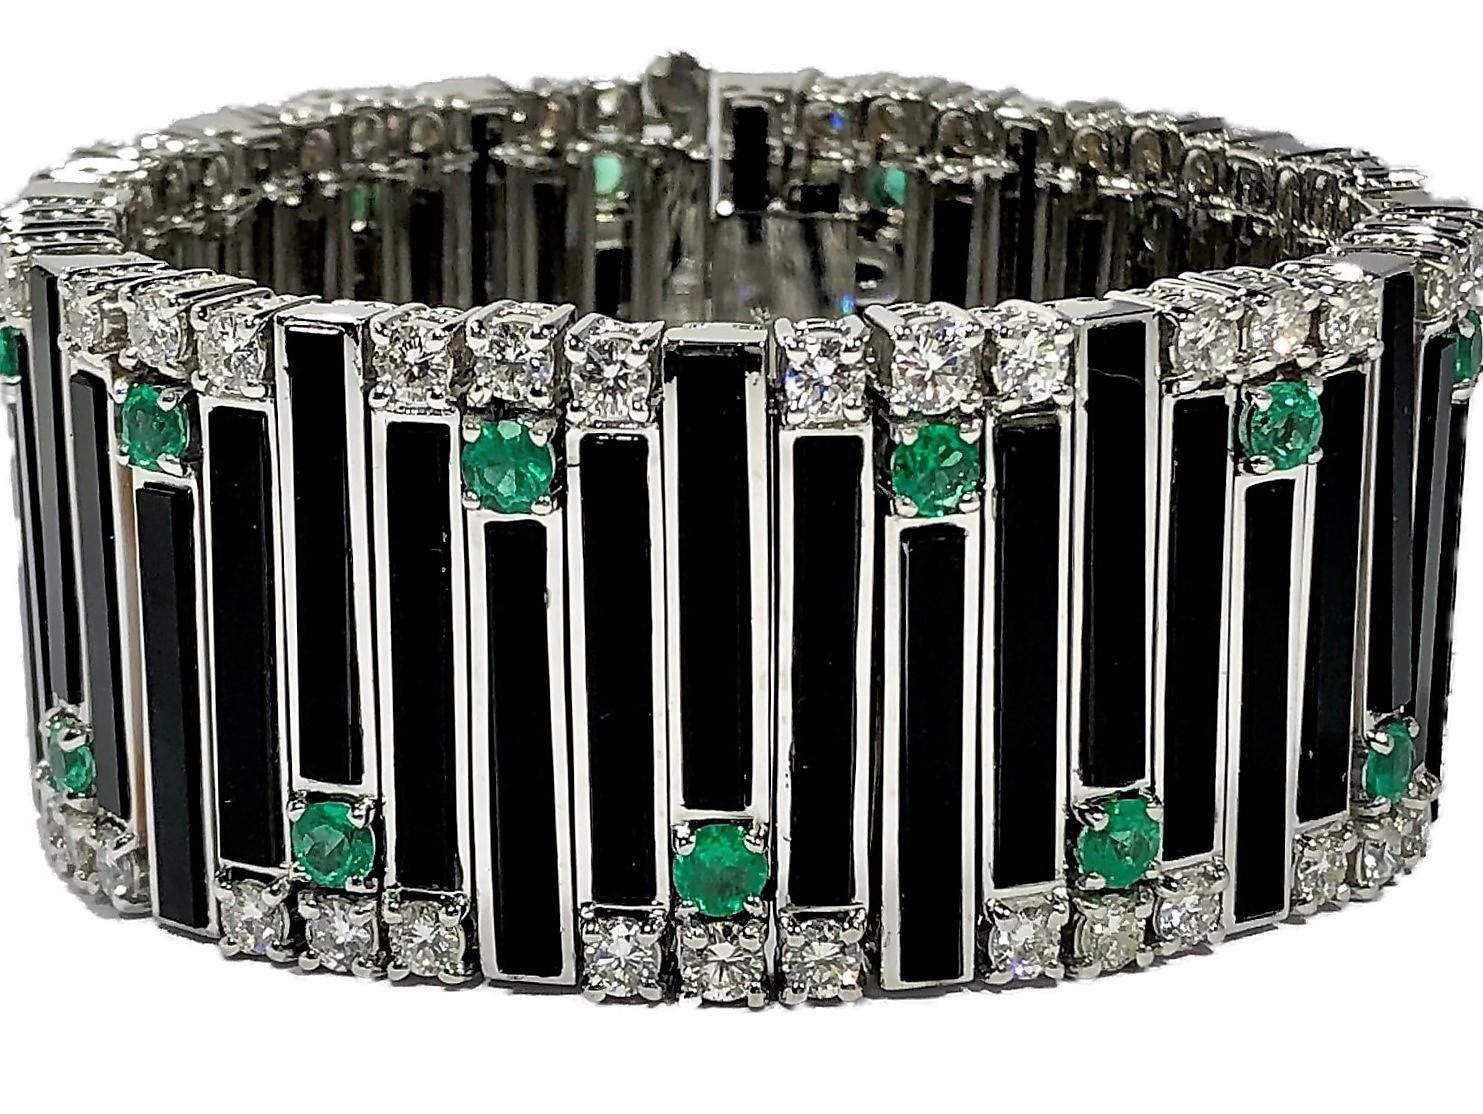 This impressive bracelet was created by EMIS BEROS who began her design career at the famous house of Harry Winston and later moved to Palm Beach where she offered up her fabulous designs from her shop on Florida's posh Worth Avenue. This particular